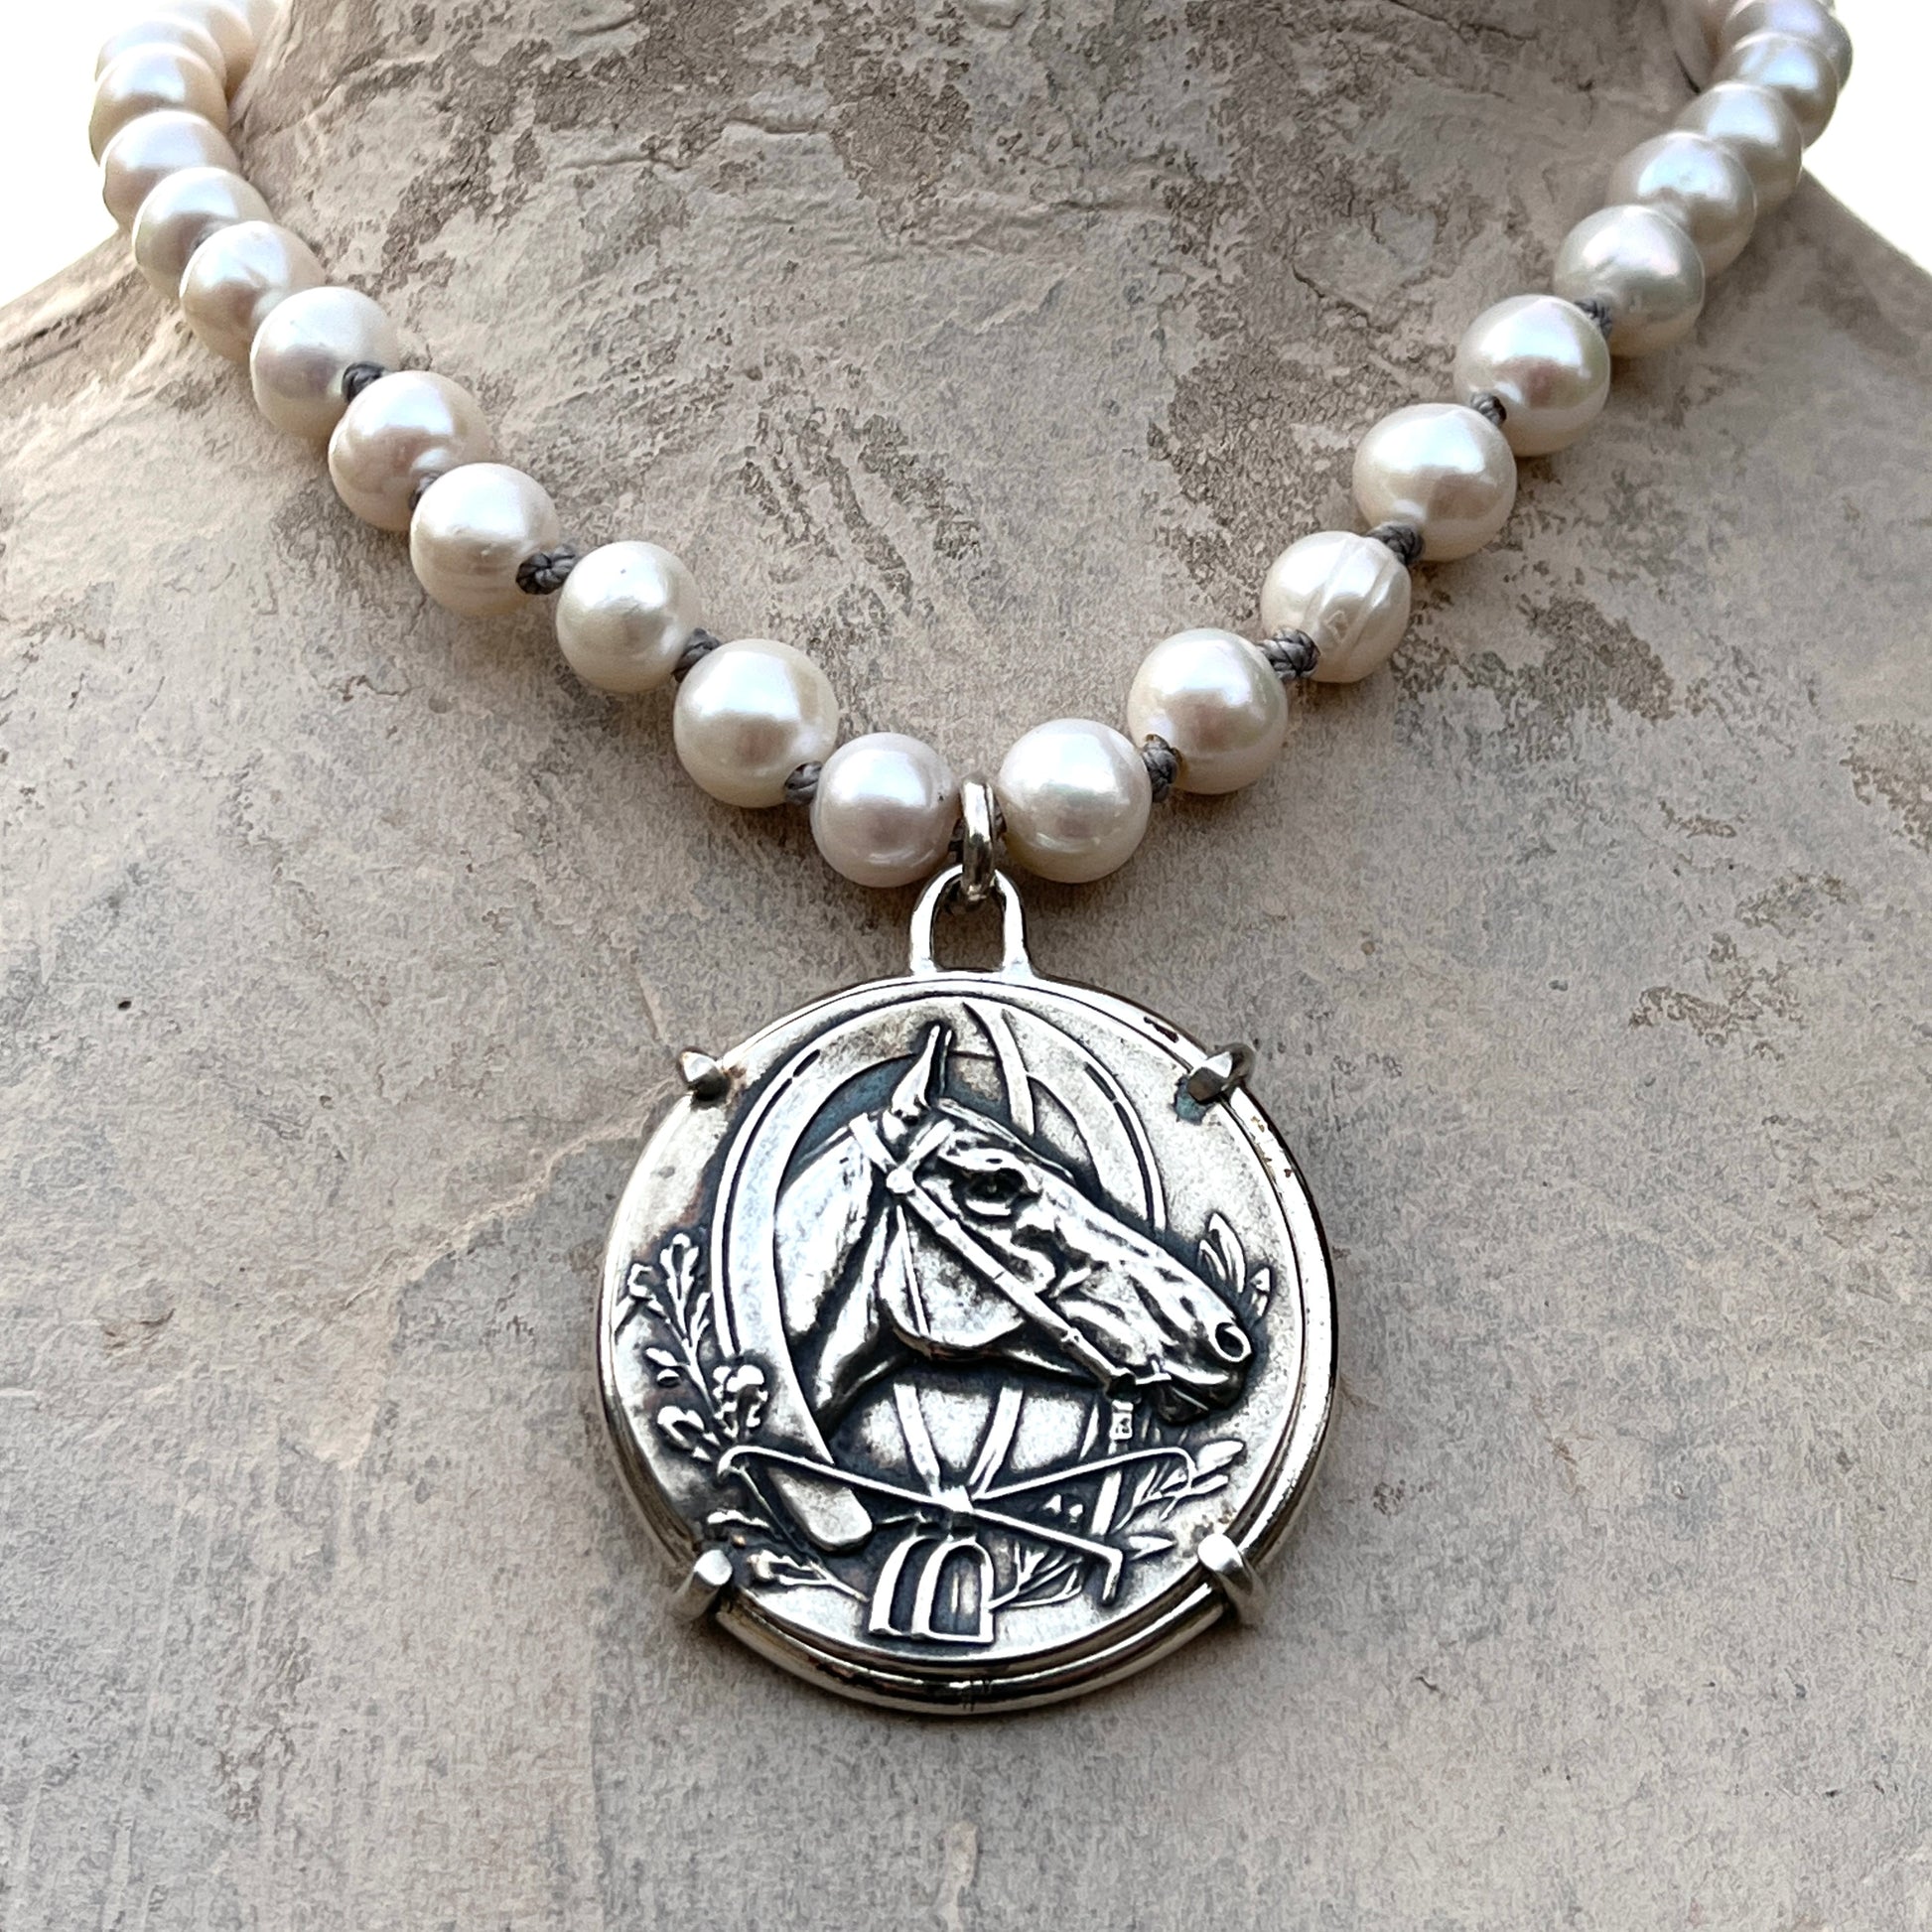 Dutch Horse Head Medal on Pearl Necklace